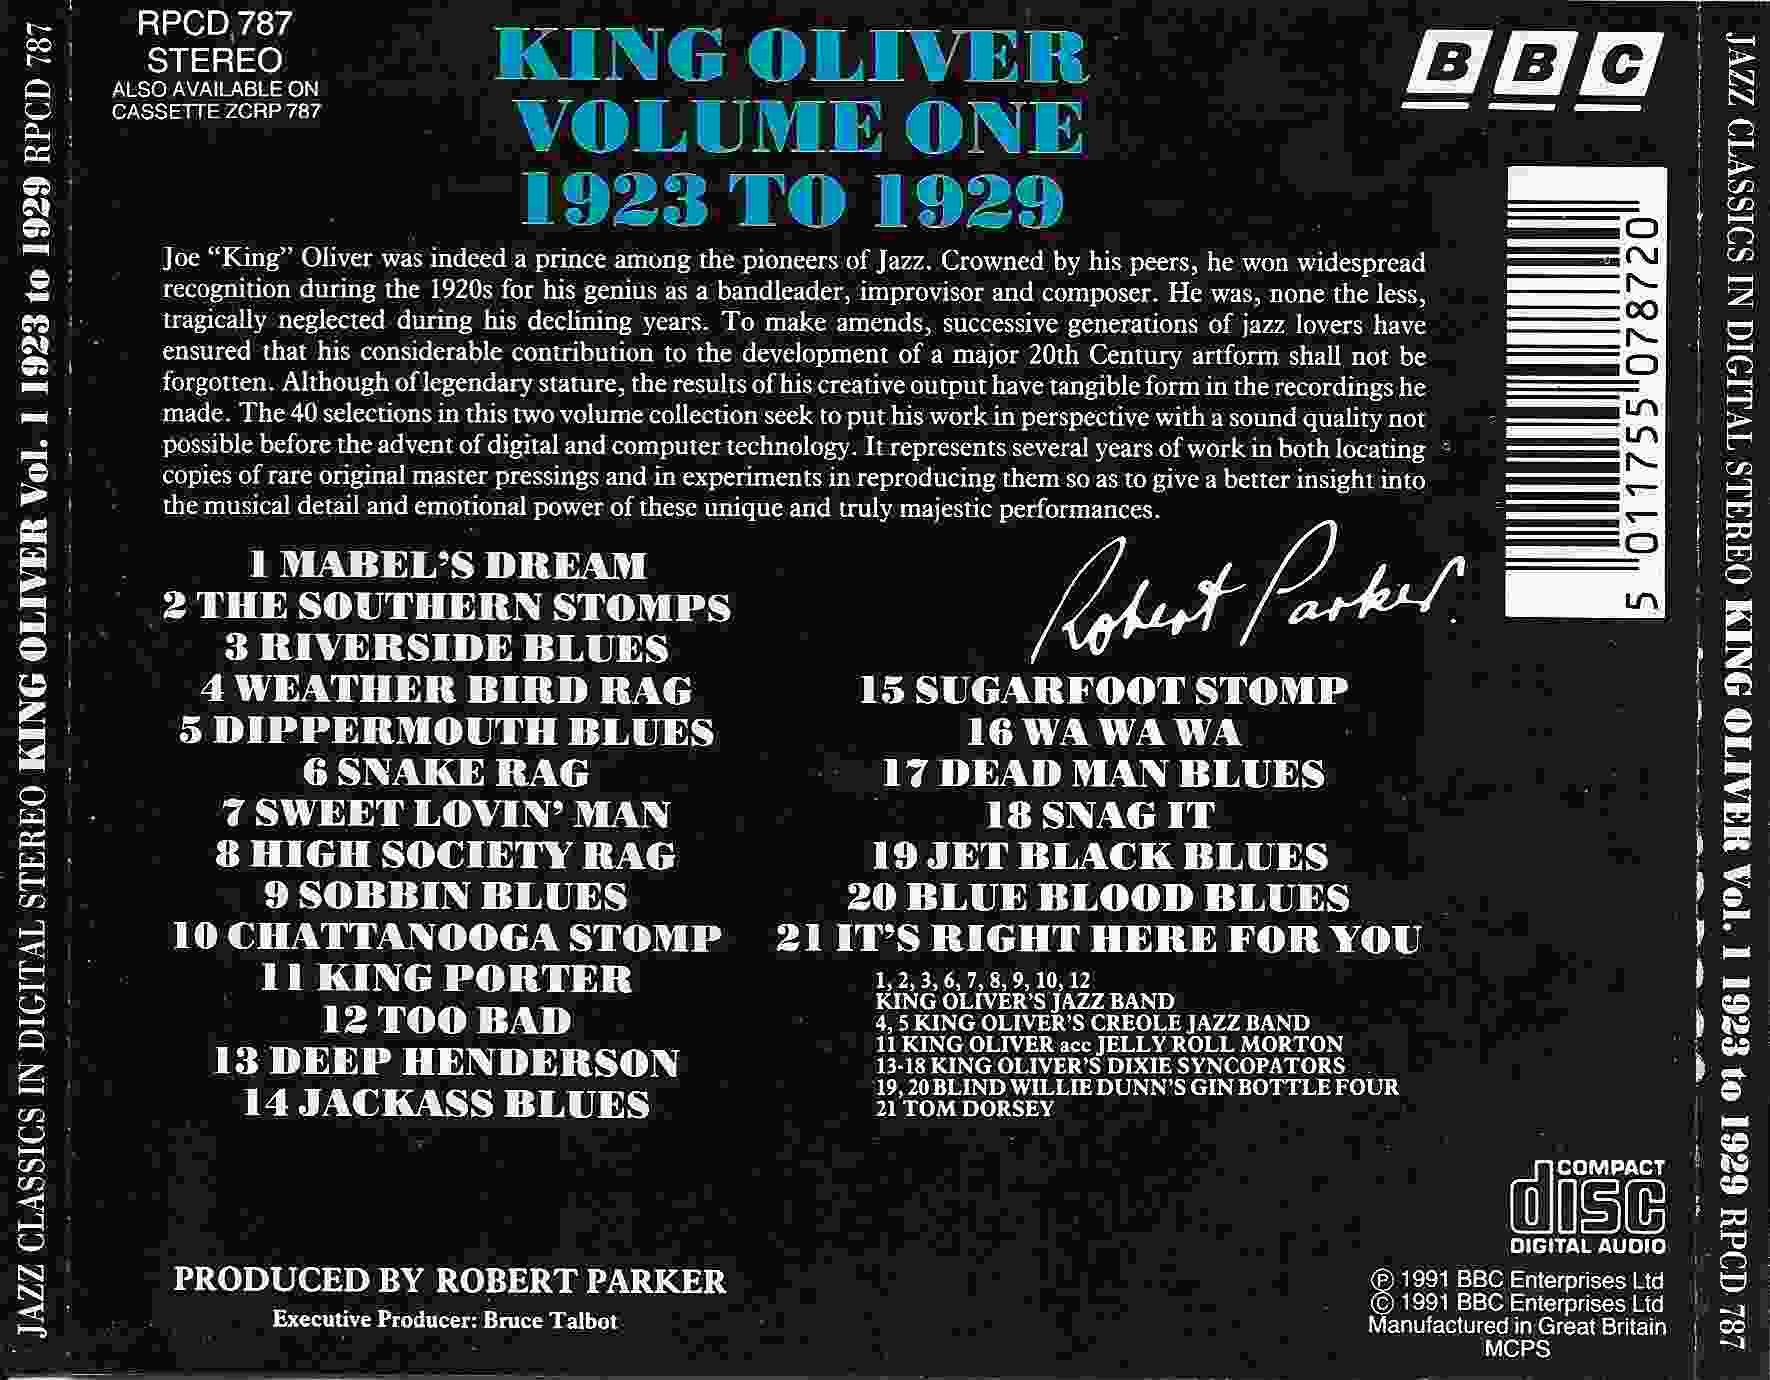 Picture of RPCD 787 King Oliver - Volume 1 1923 - 1929 by artist Joe Oliver from the BBC records and Tapes library